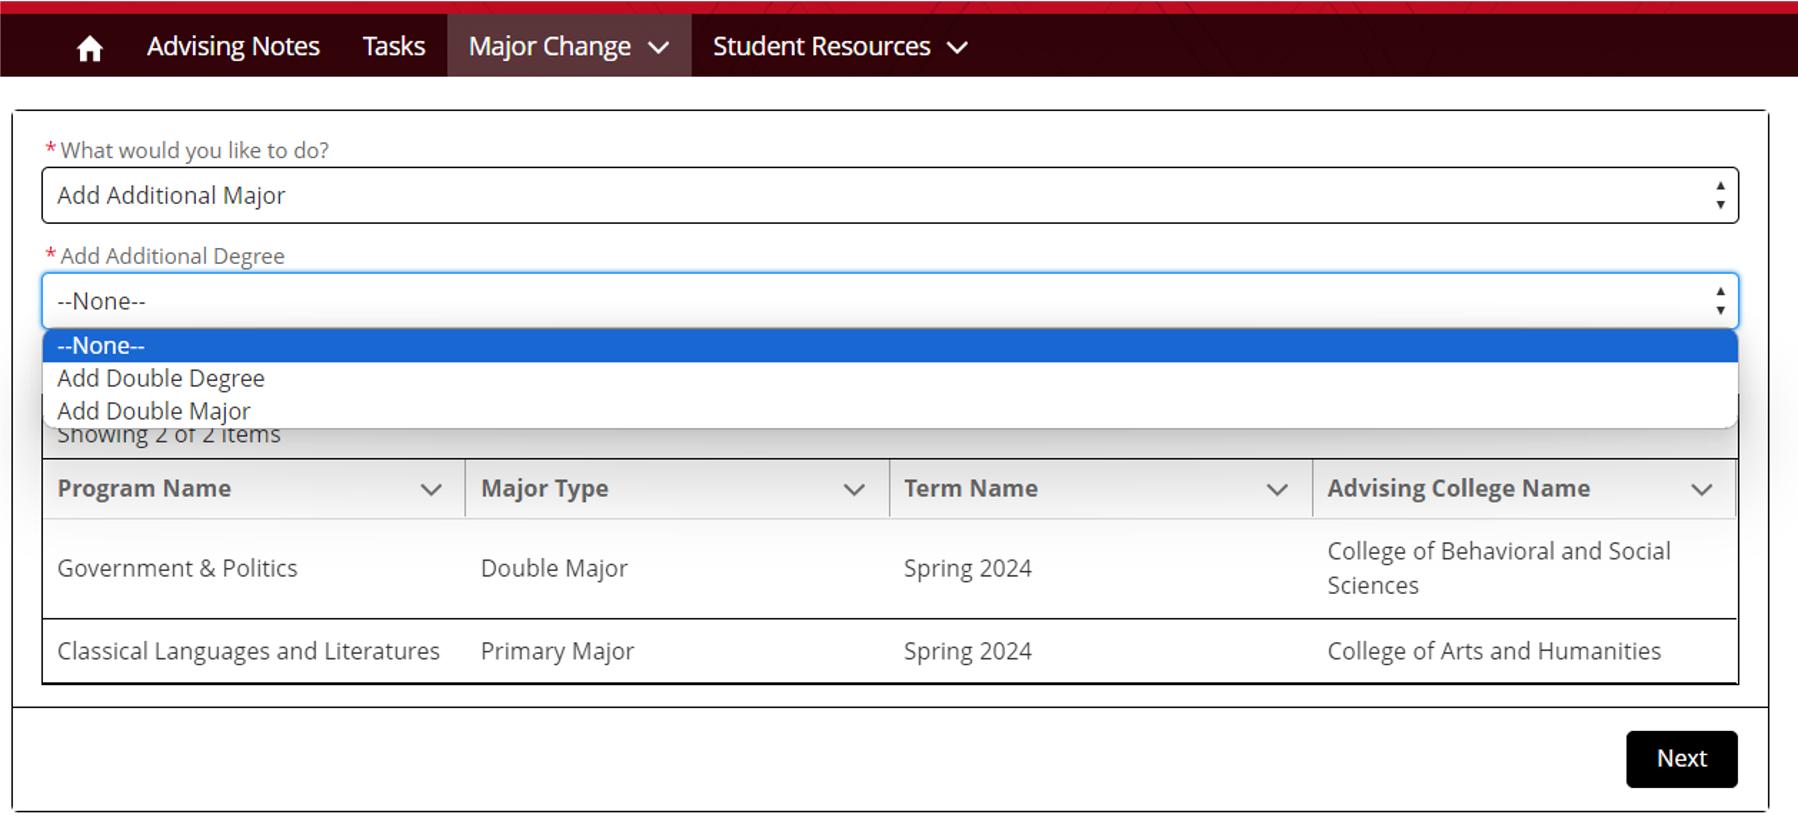 Dropdown menu to either add a double major or double degree